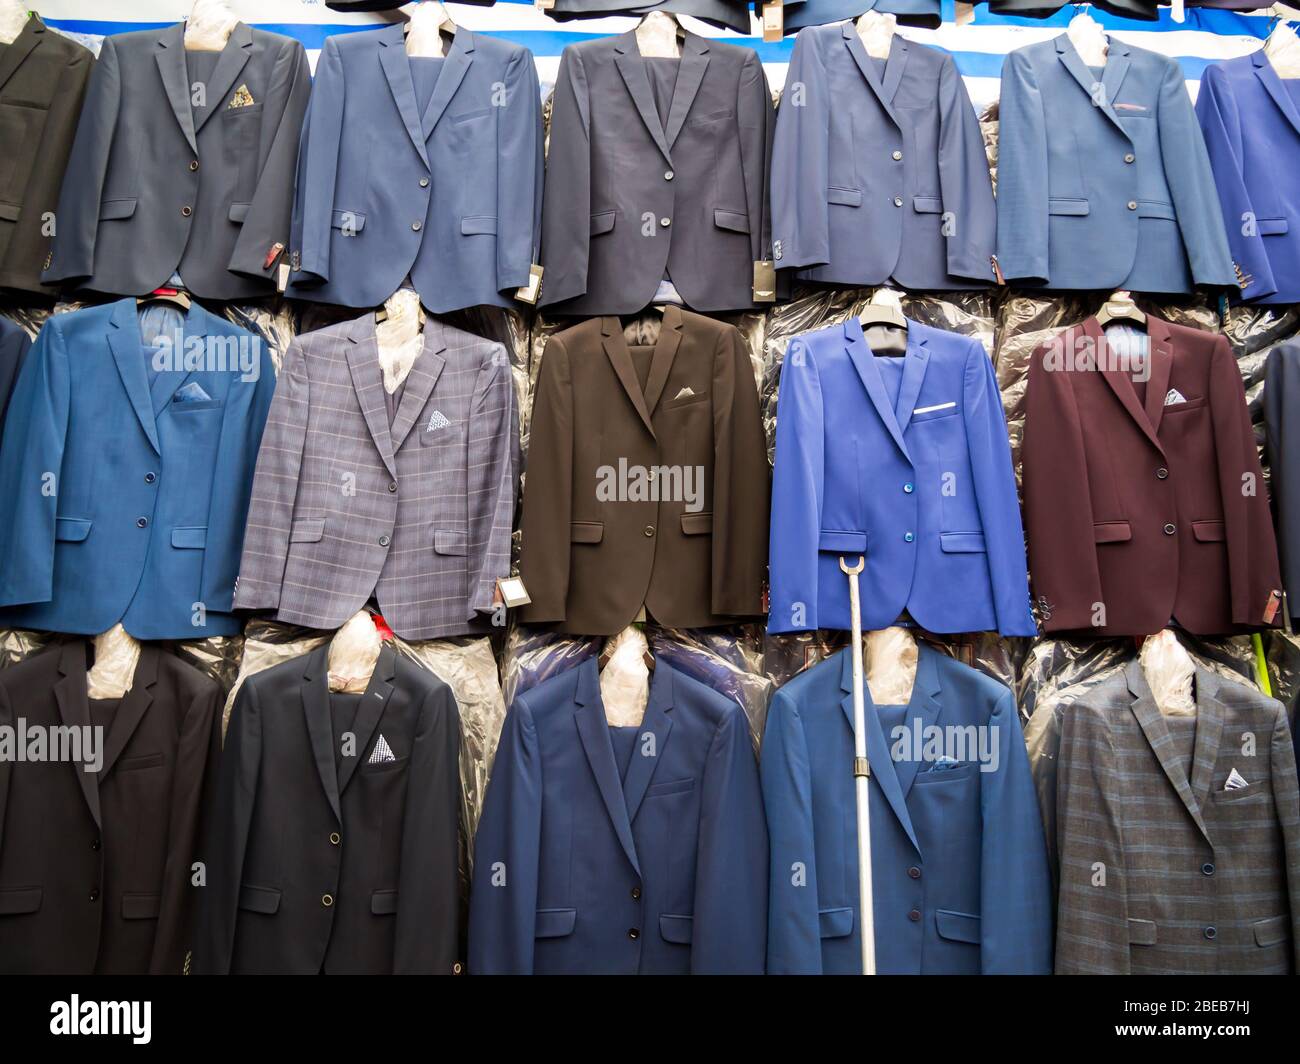 Rows of hanging new men's suits on the market. Stock Photo